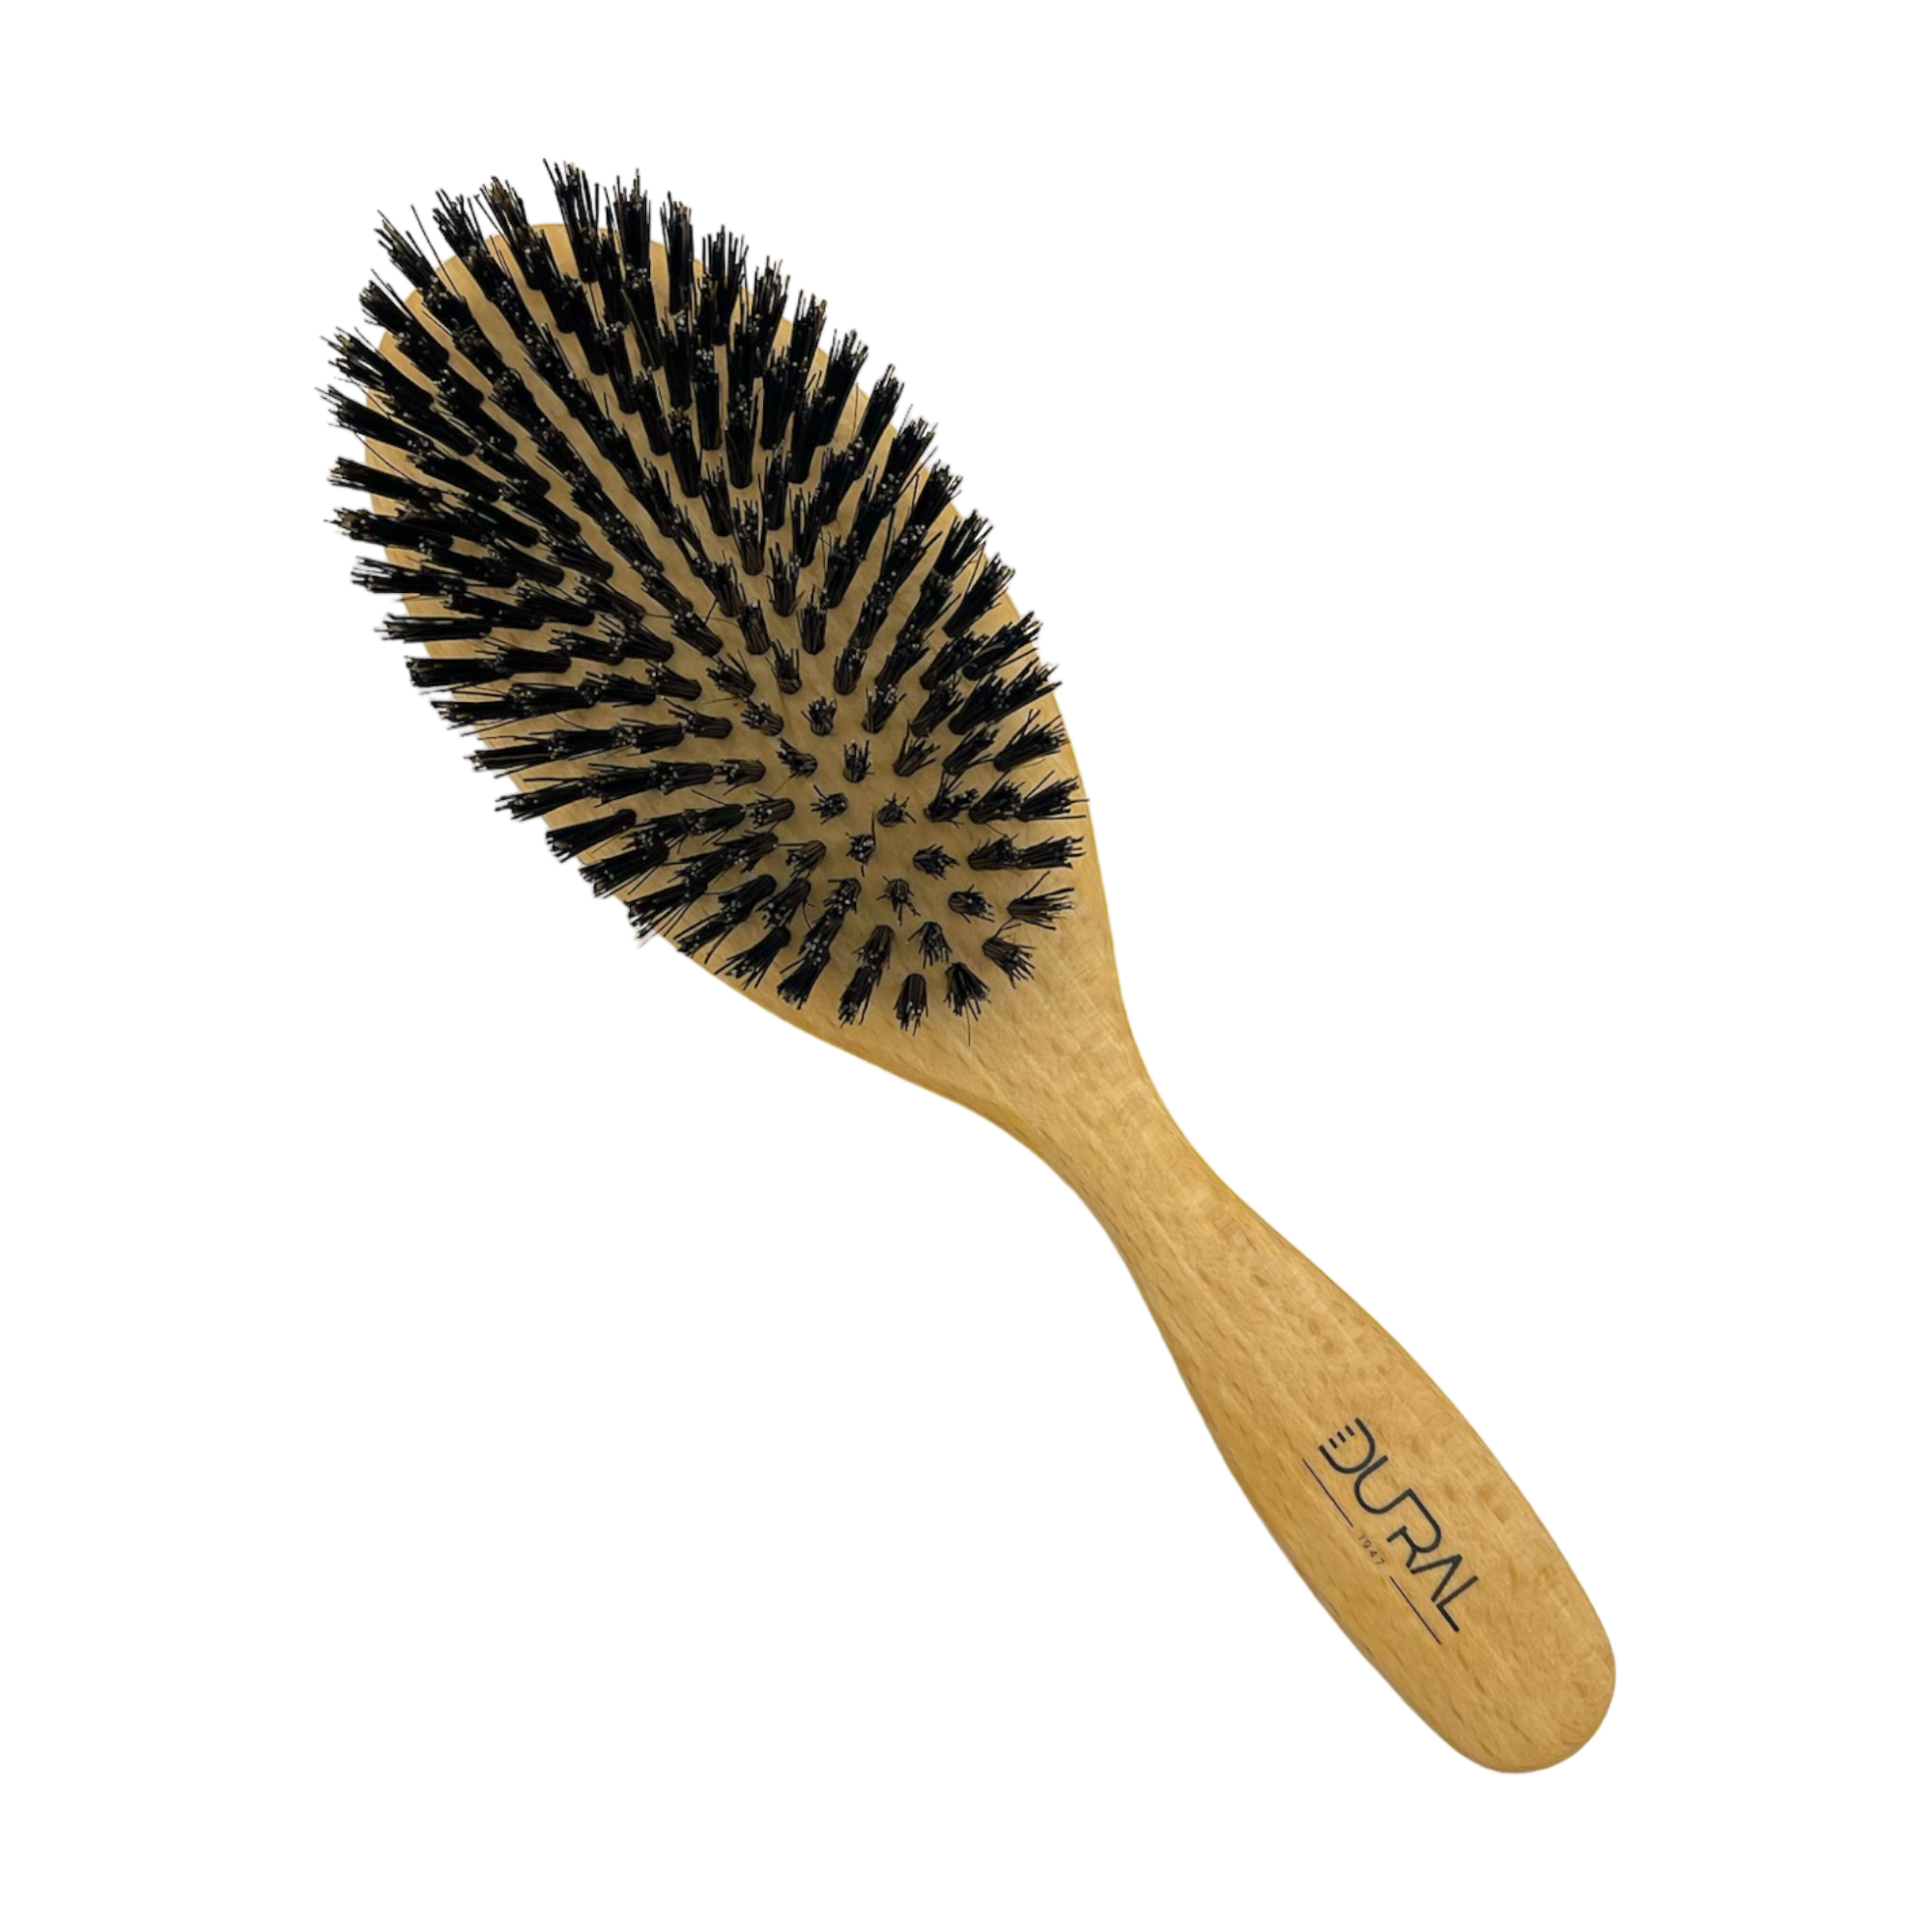 Dural Beech wood hair brush with pure boar bristles - 10 rows